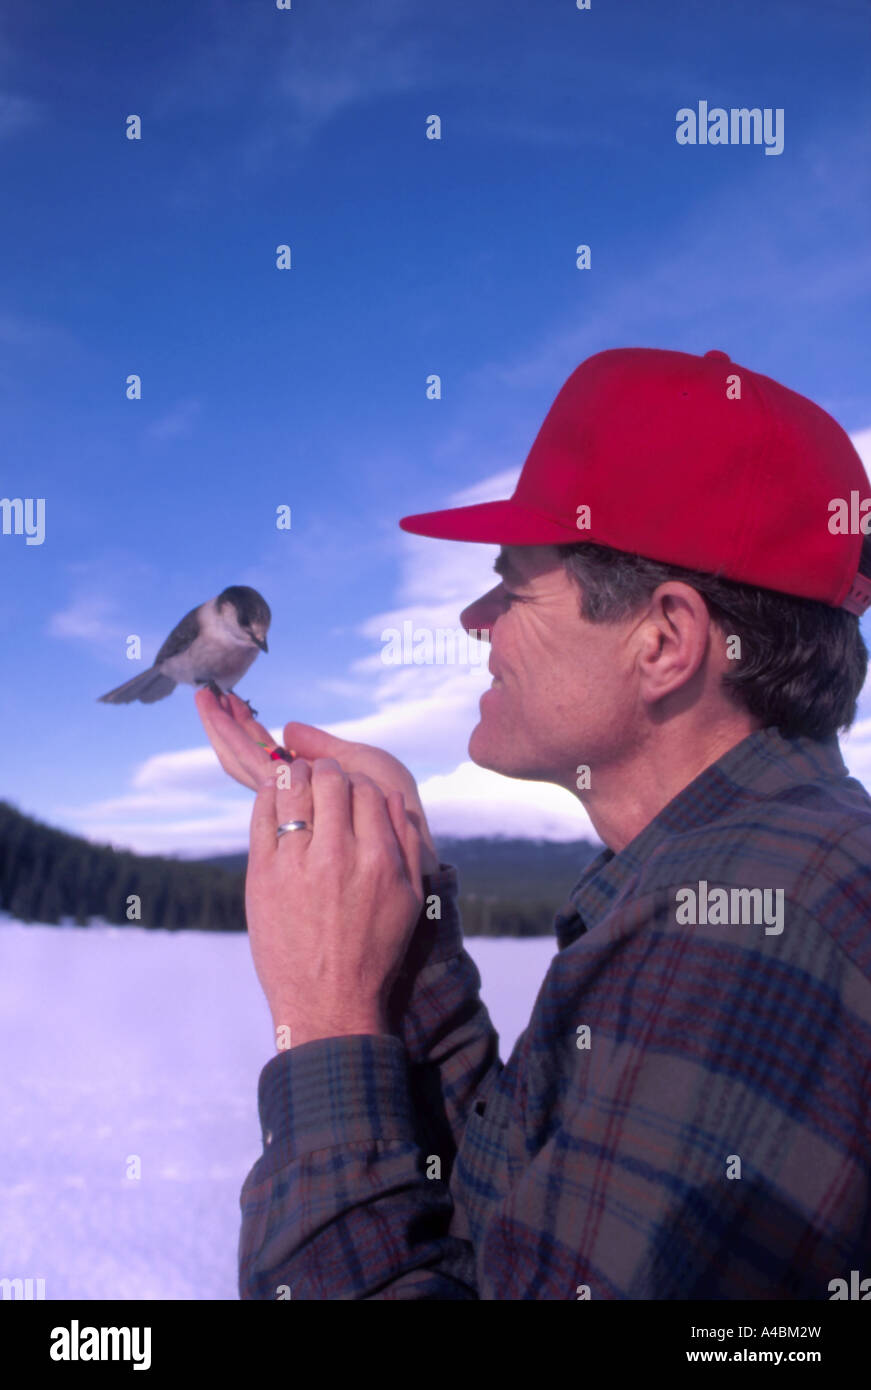 35,449.07200 Man feeding enjoying watching Canada jay in winter scene with snow and blue sky, red hat Stock Photo